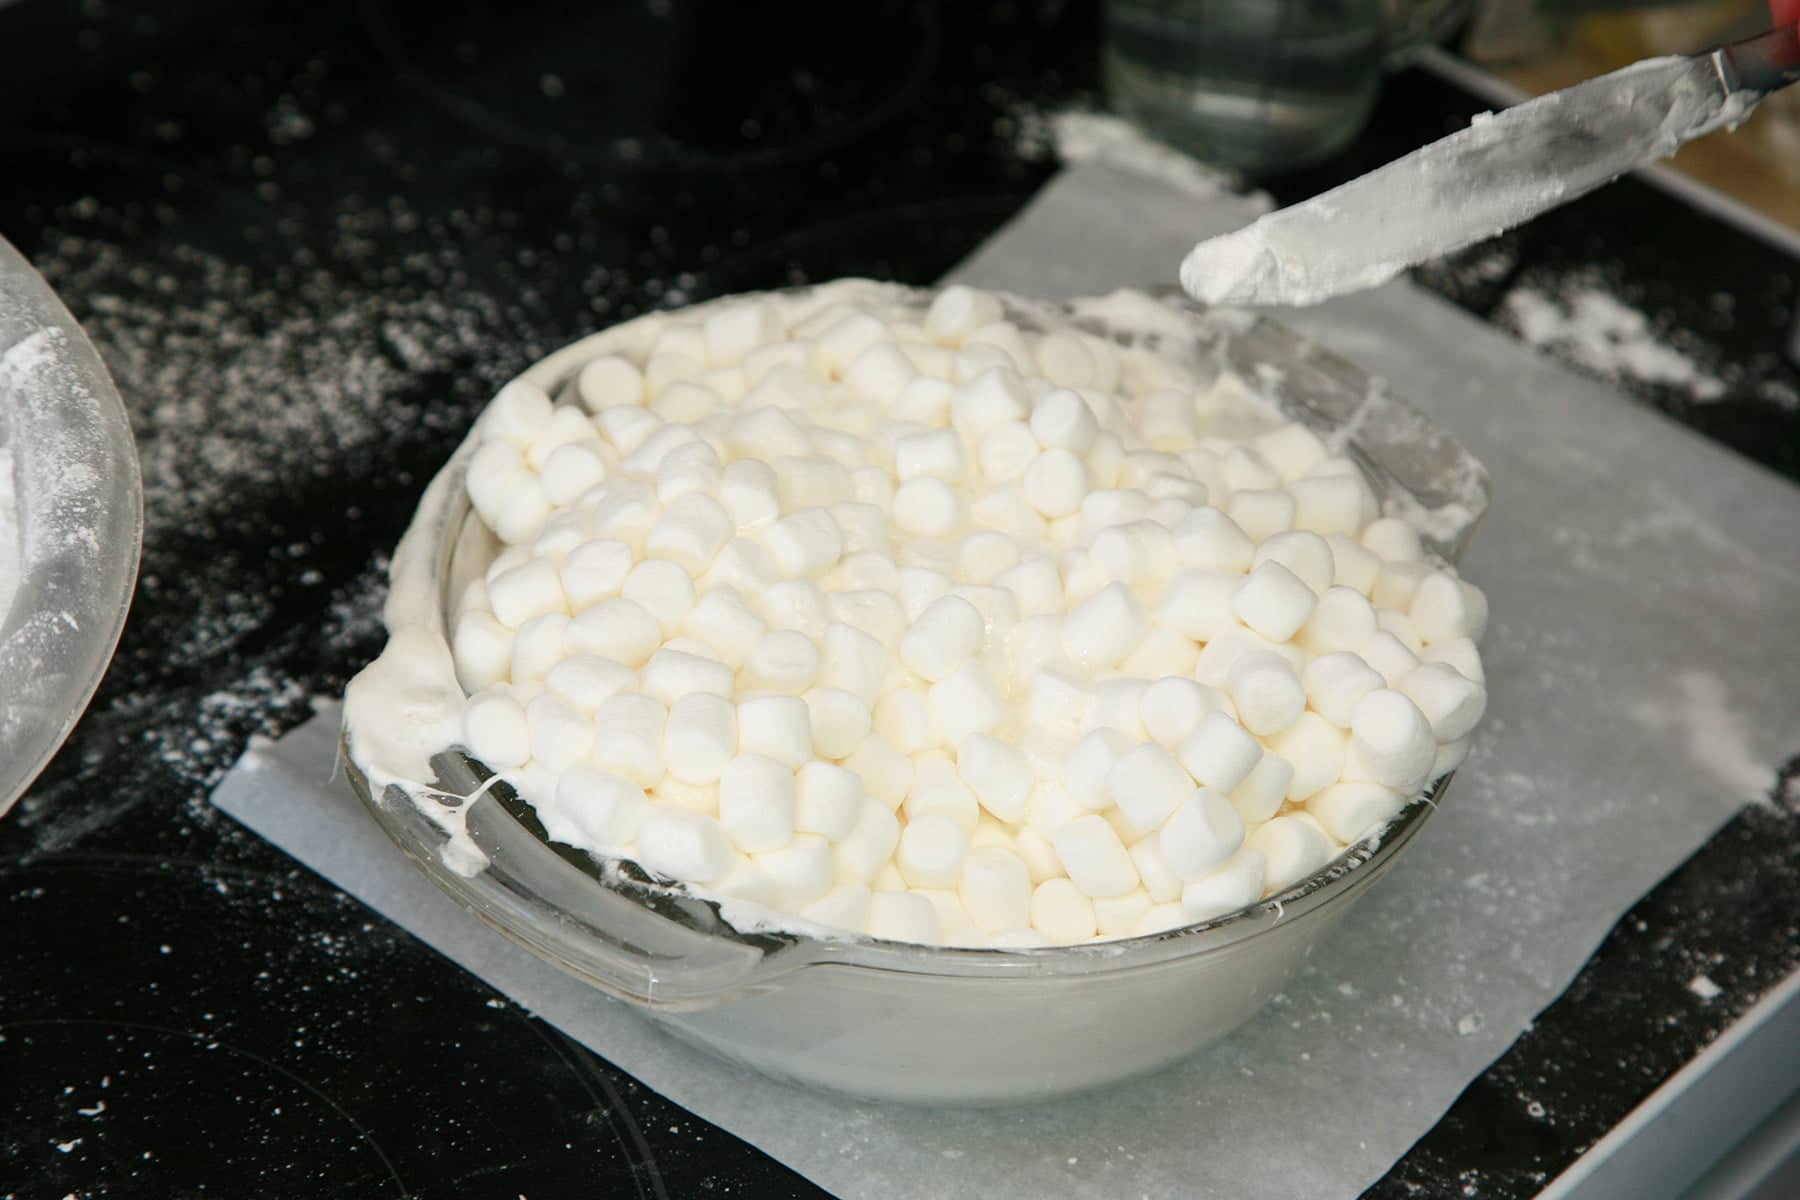 A glass bowl of melted mini marshmallows, being stirred with a knife.